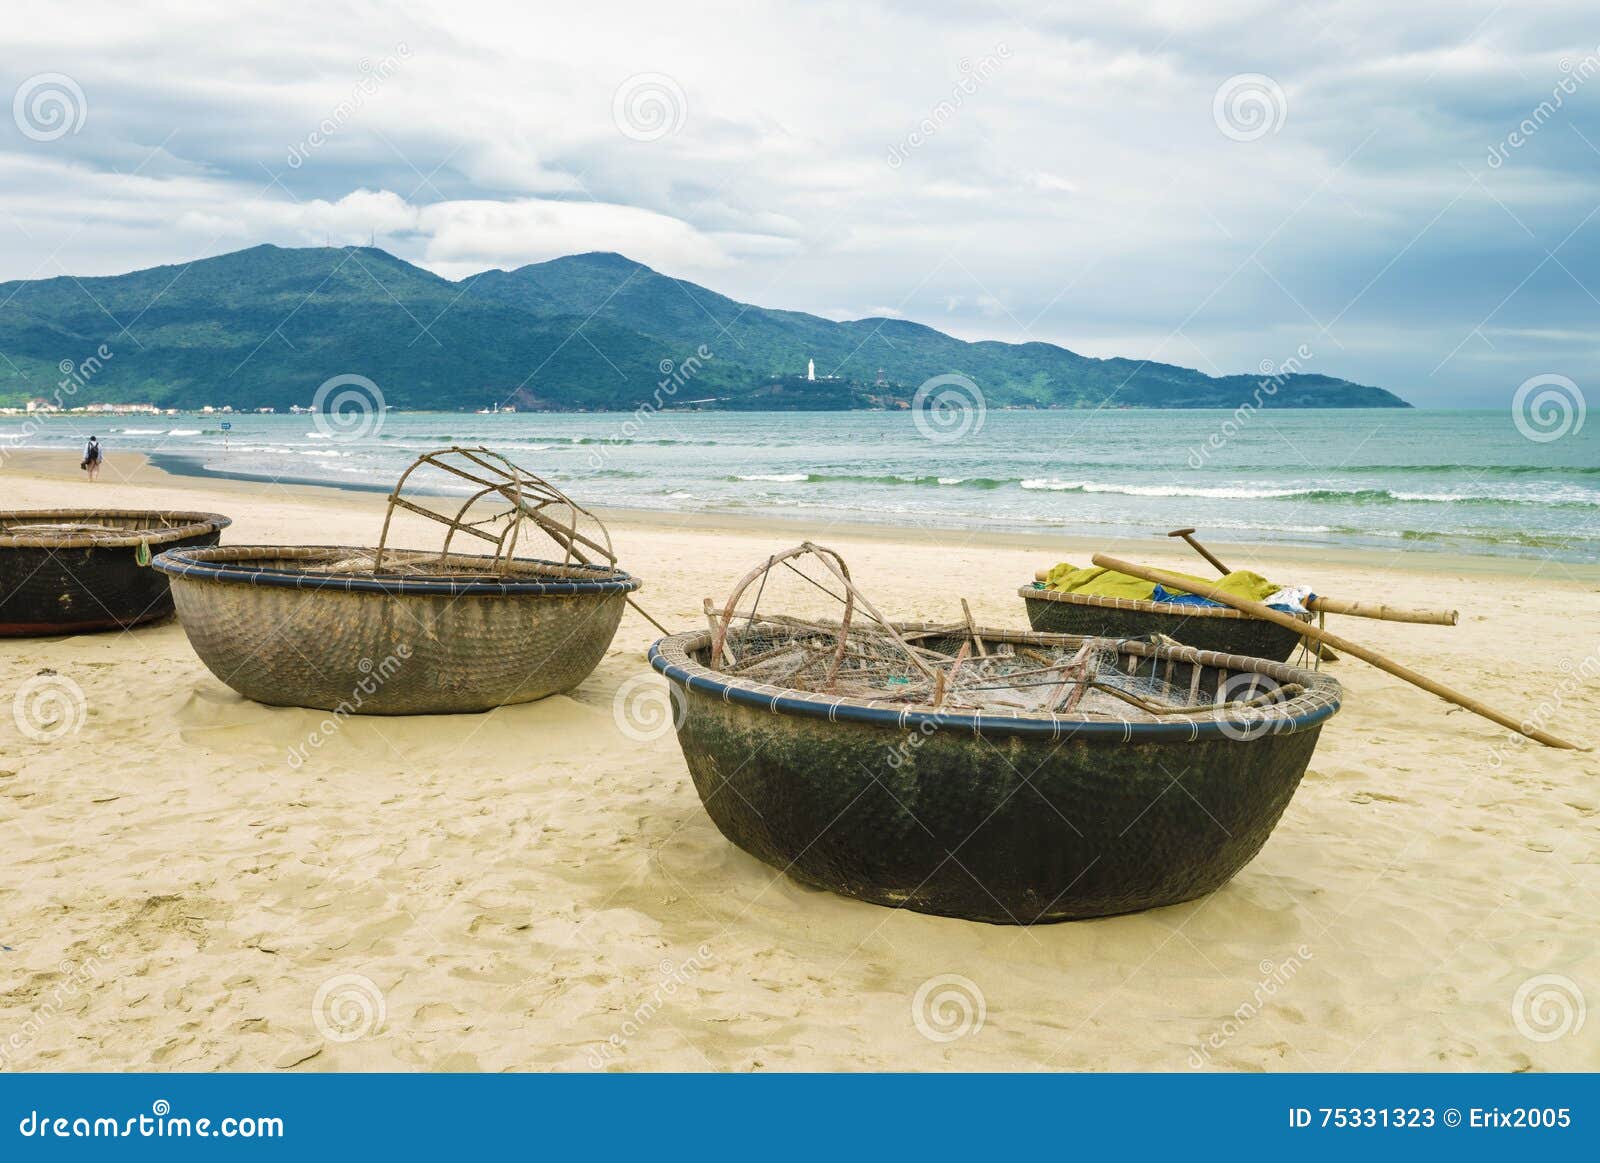 Traditional Bamboo Hat for Fishermen in Southern China Beachfront 